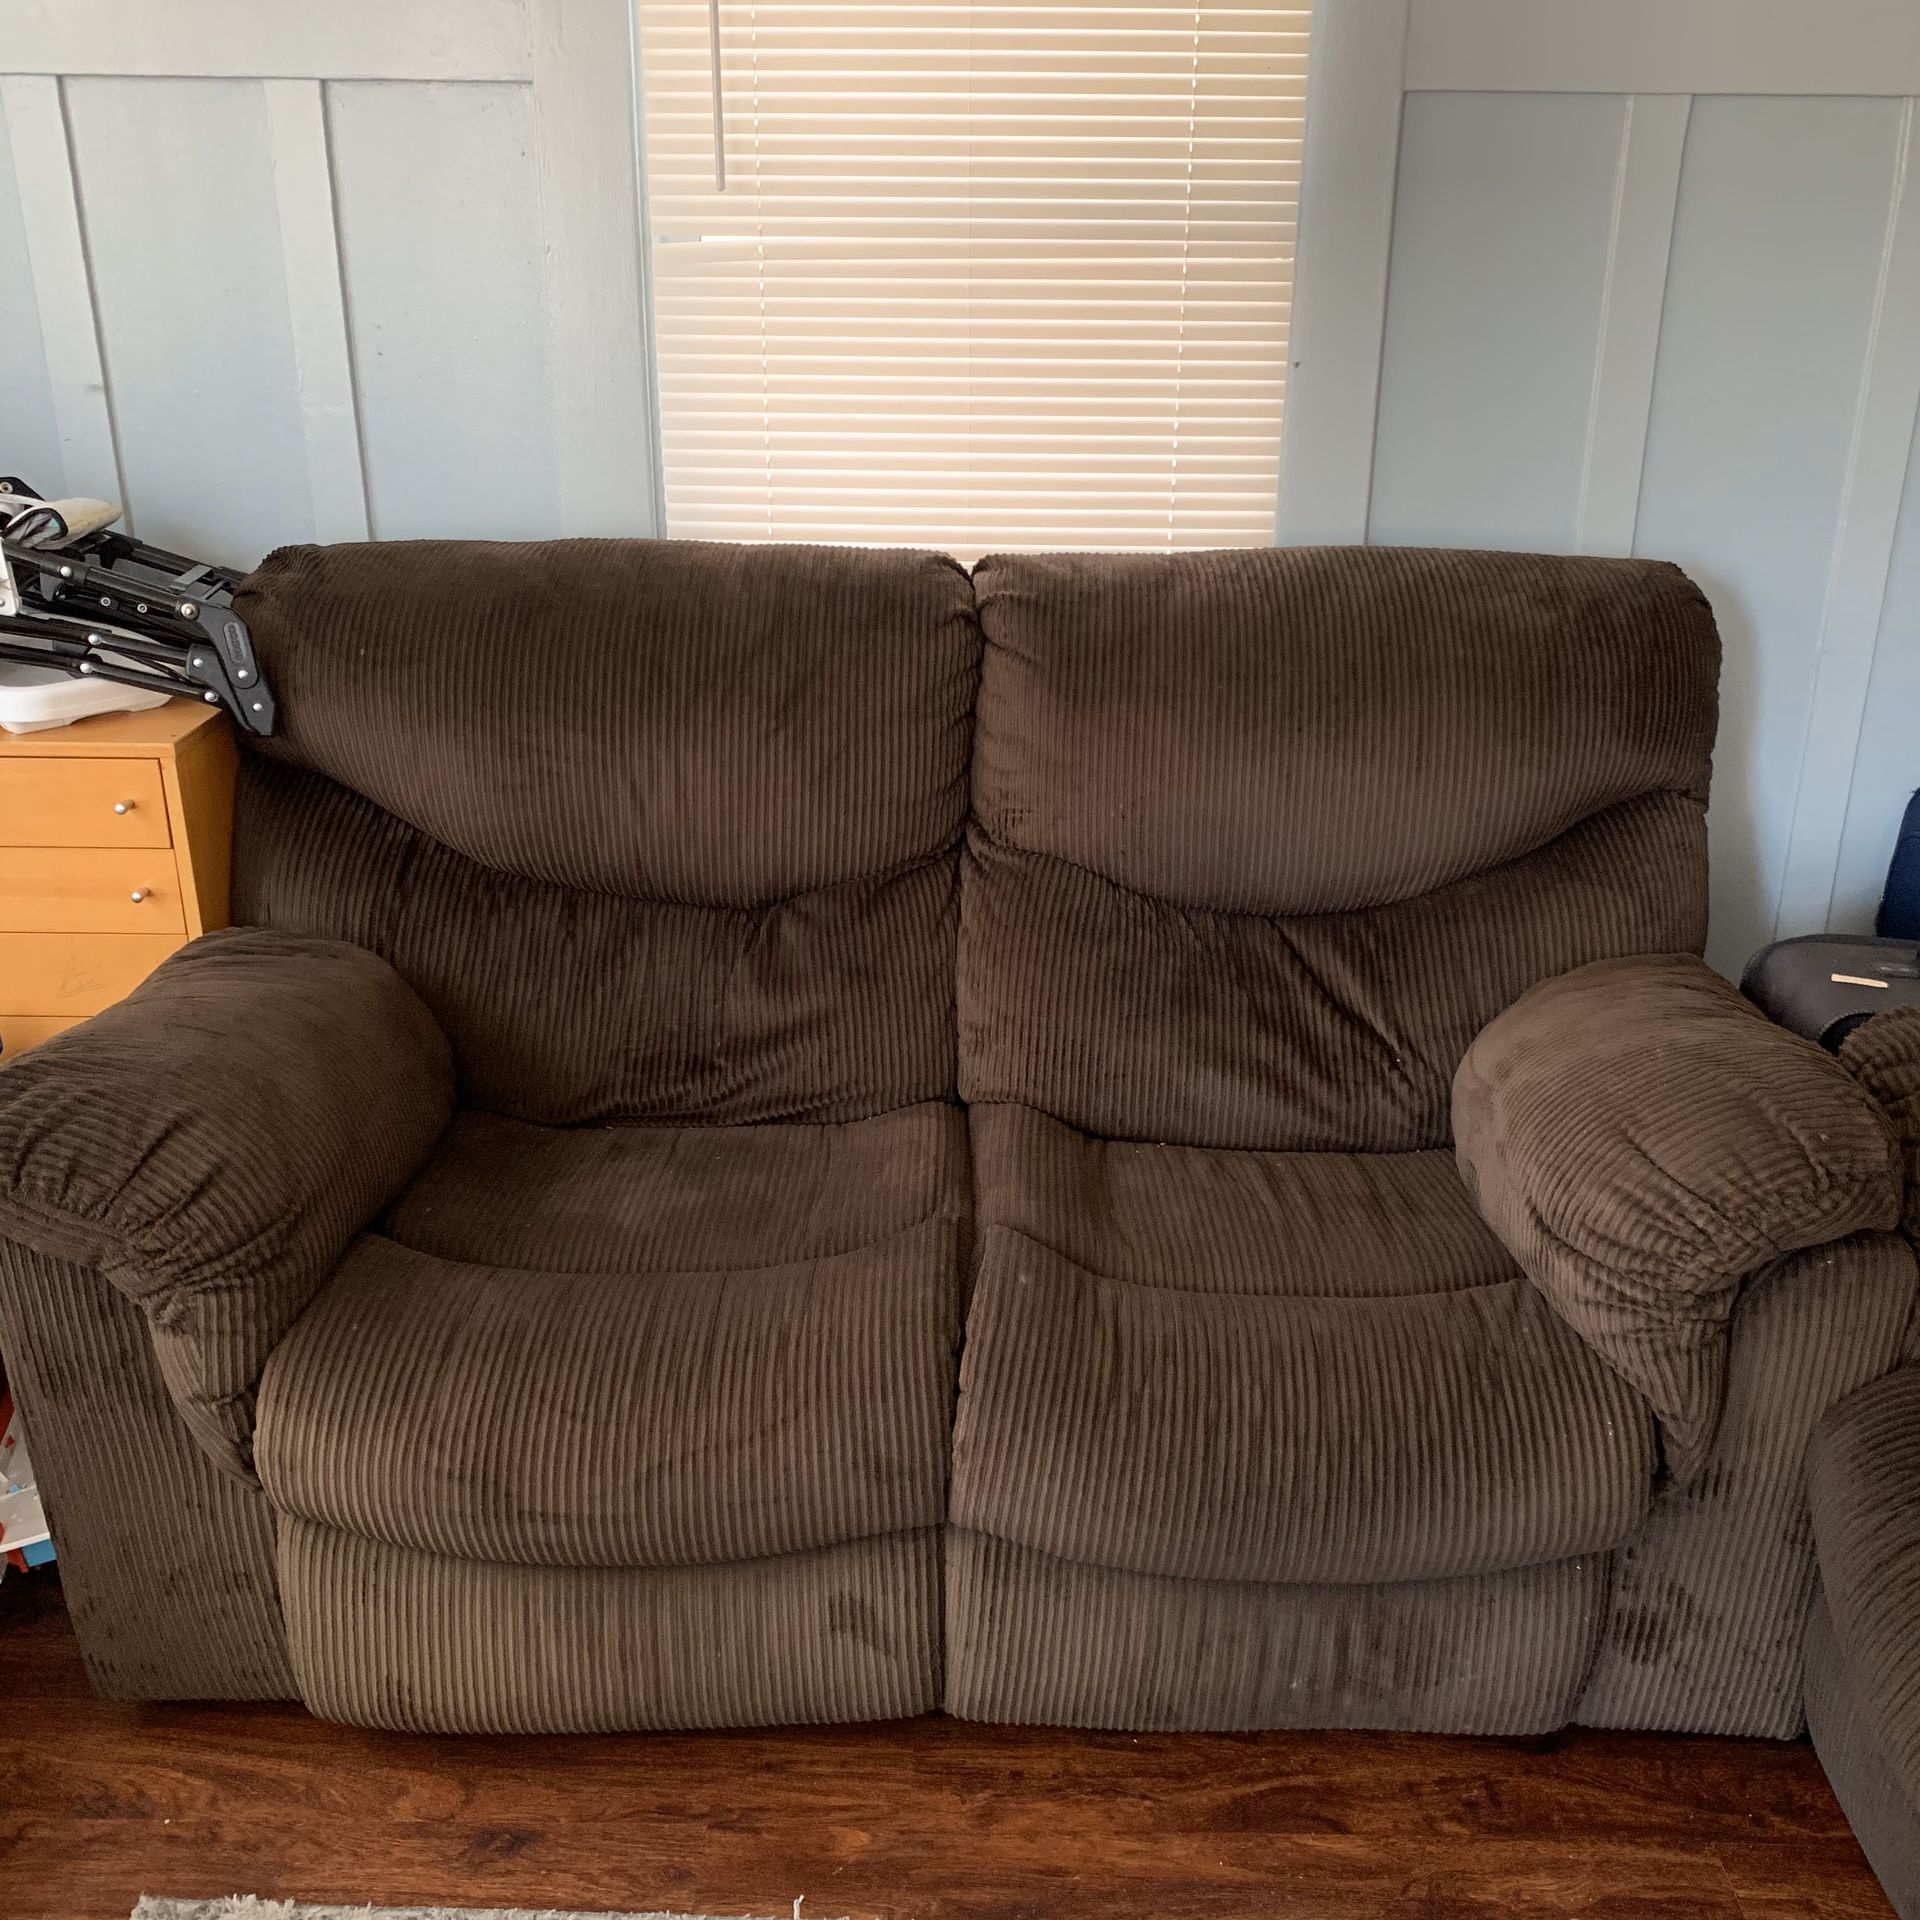 LTS - Reclining Couches ! $250.00